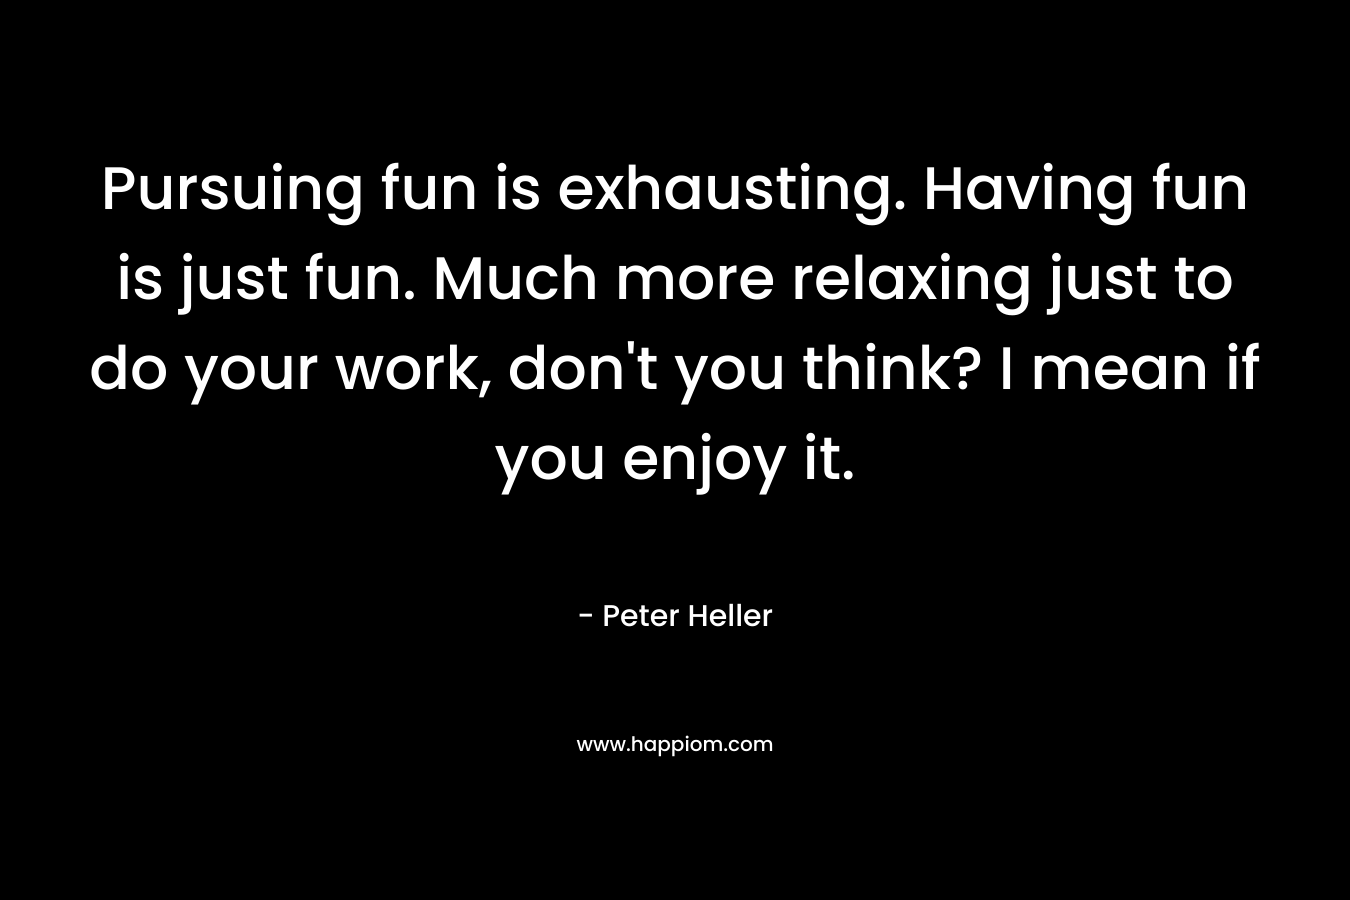 Pursuing fun is exhausting. Having fun is just fun. Much more relaxing just to do your work, don’t you think? I mean if you enjoy it. – Peter Heller